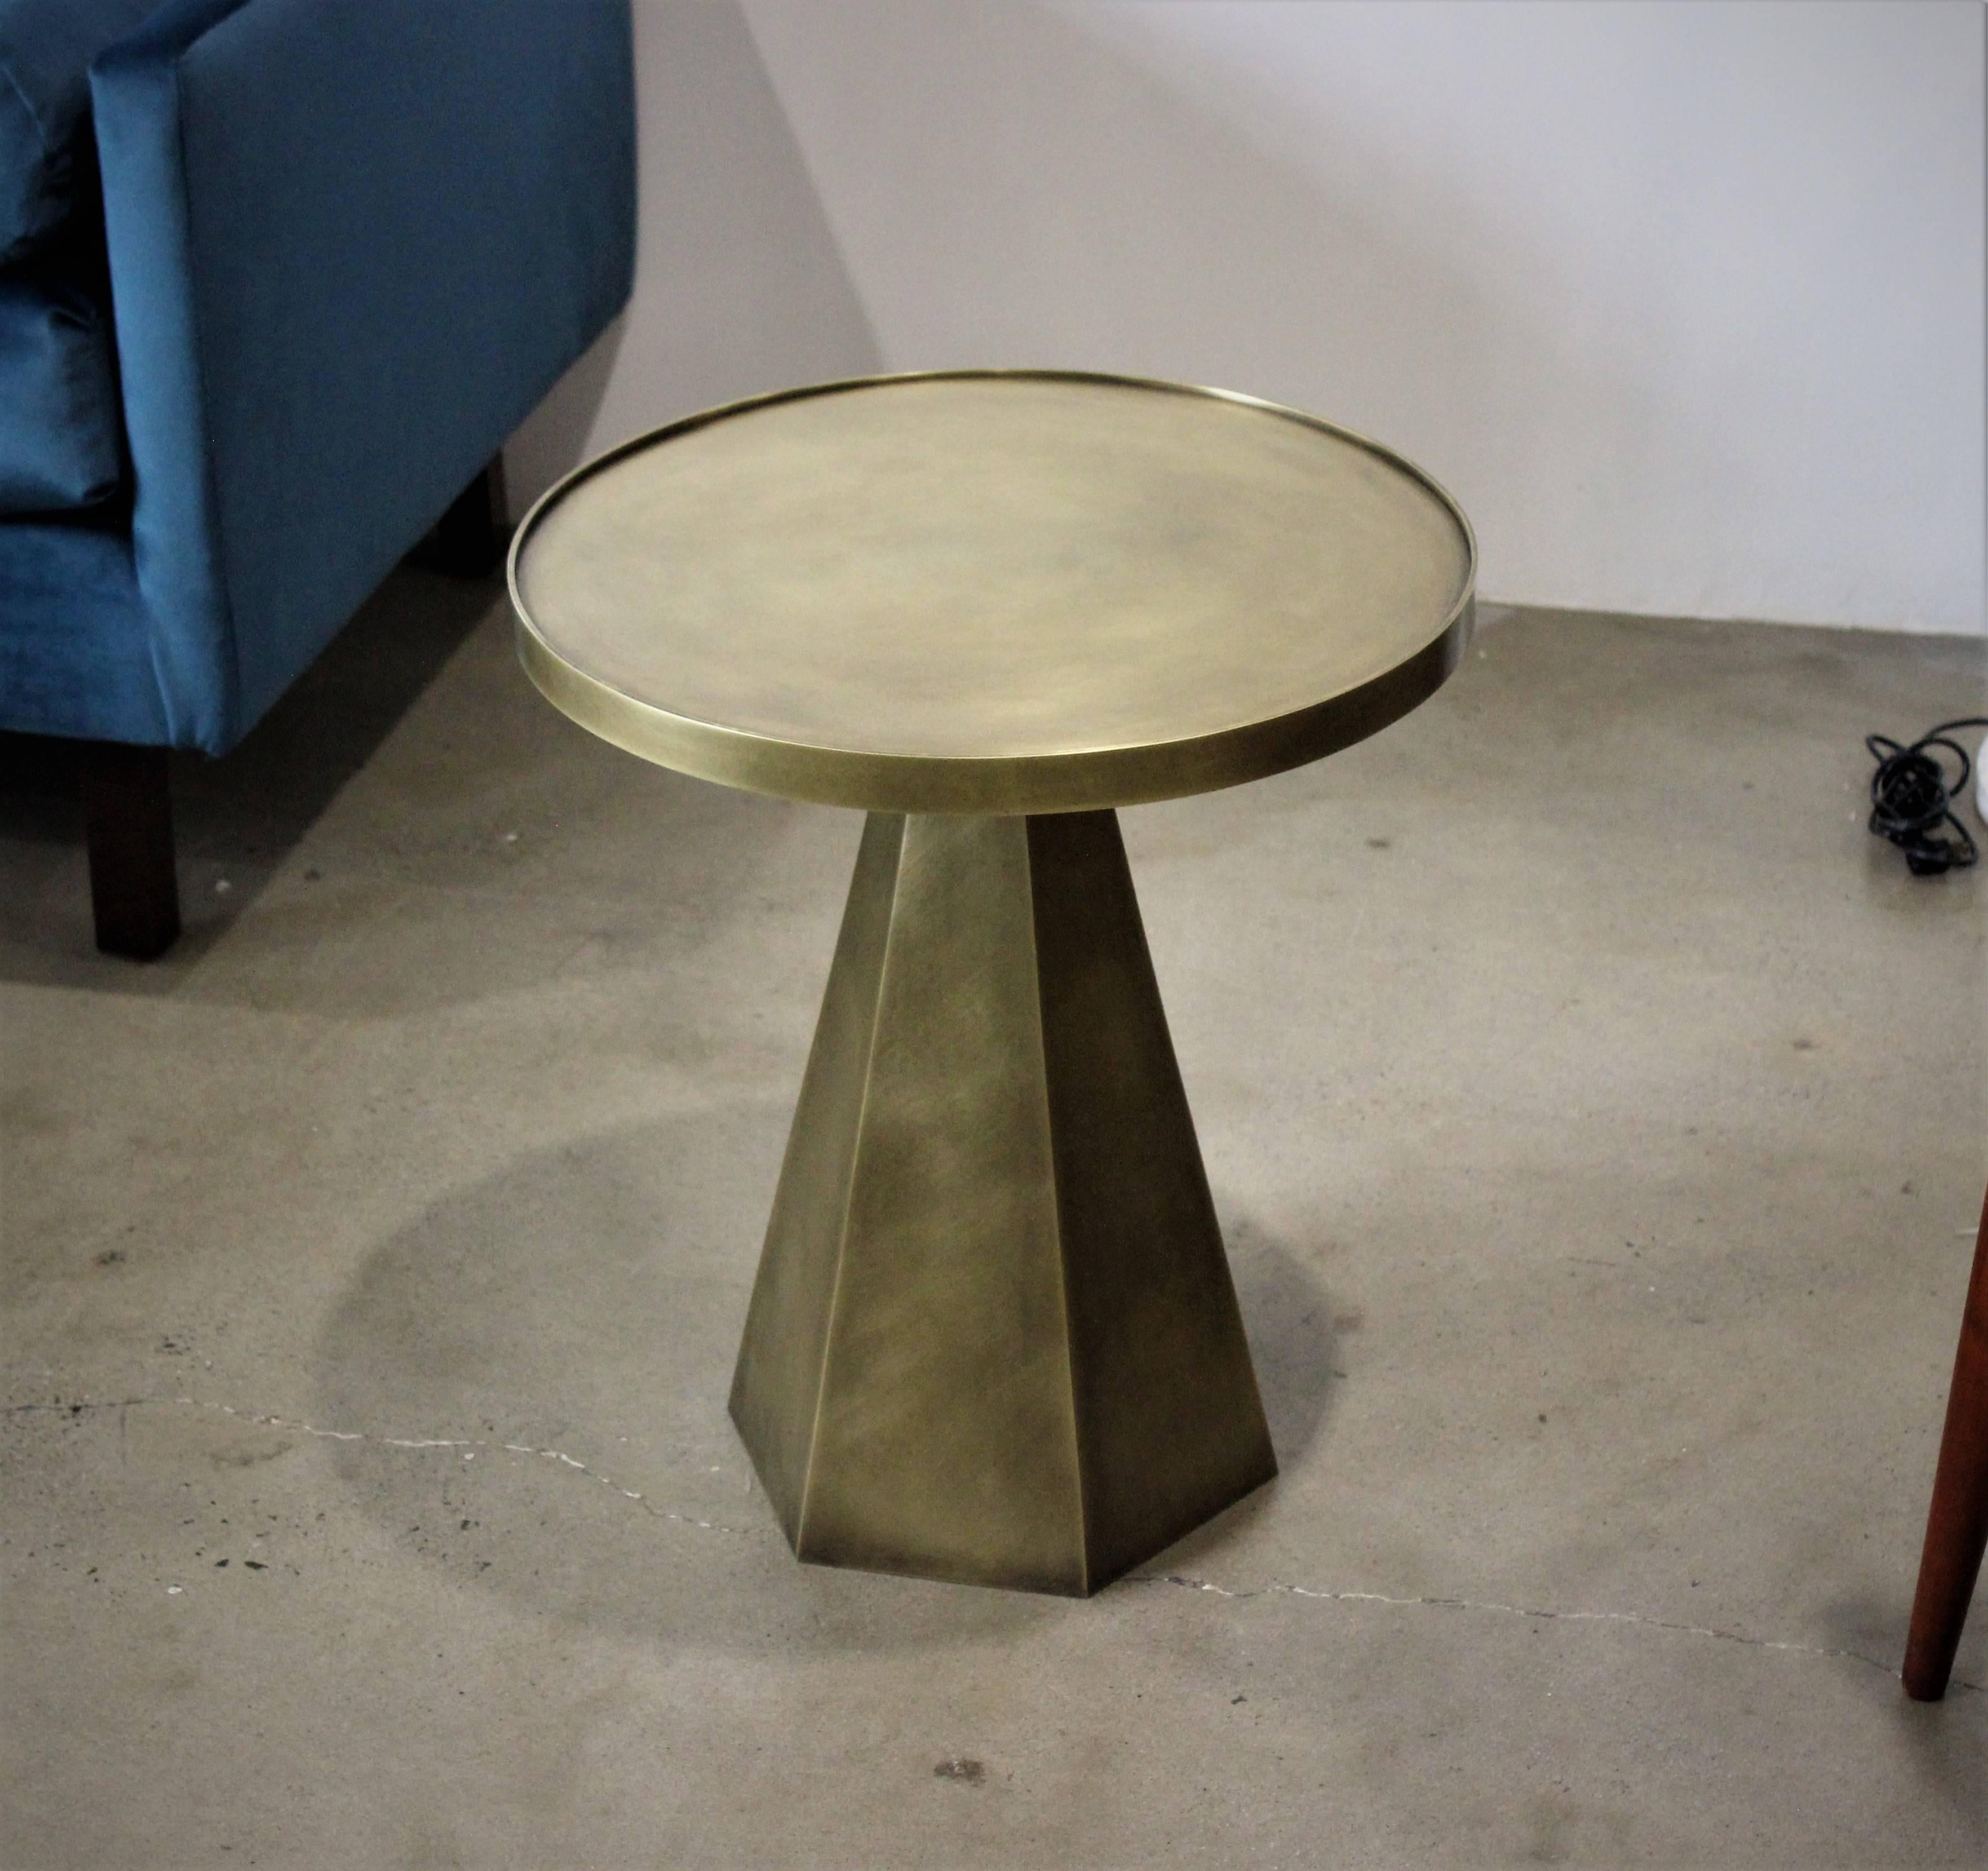 Hollywood Regency Sculptural Hand-Forged Hexagonal Side Table in Solid Patinated Brass